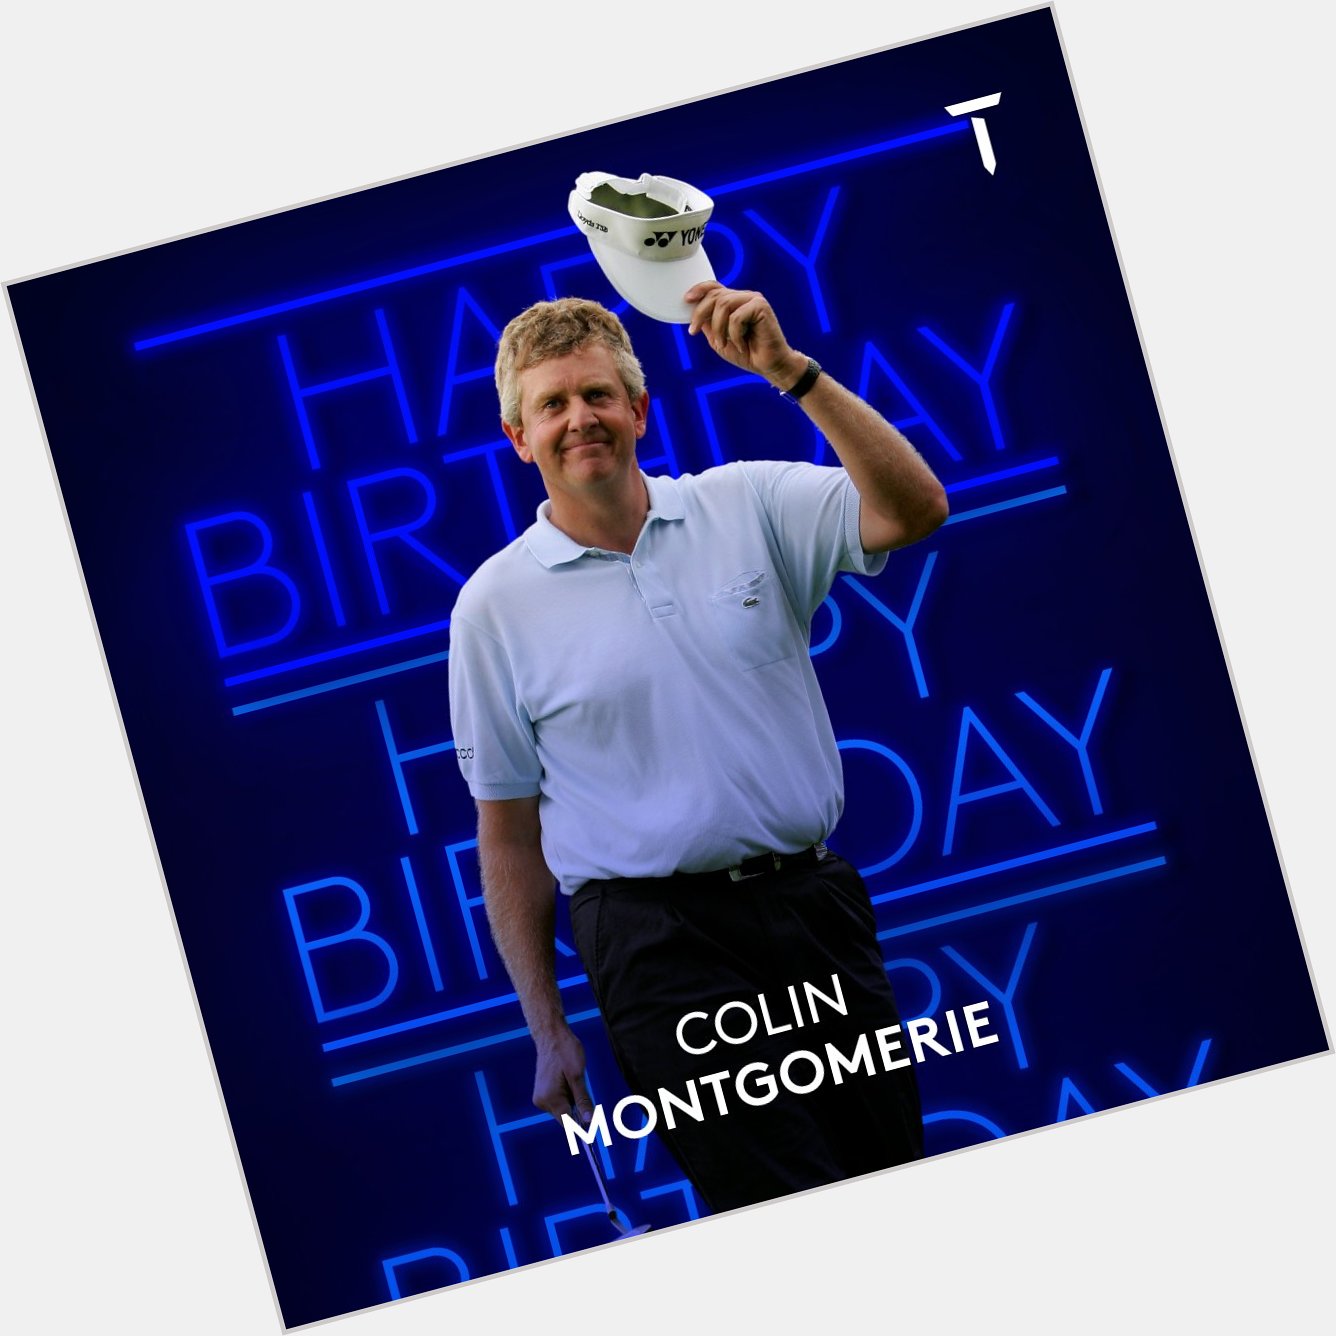  Double birthday celebrations Happy birthday Colin Montgomerie and David Howell! 